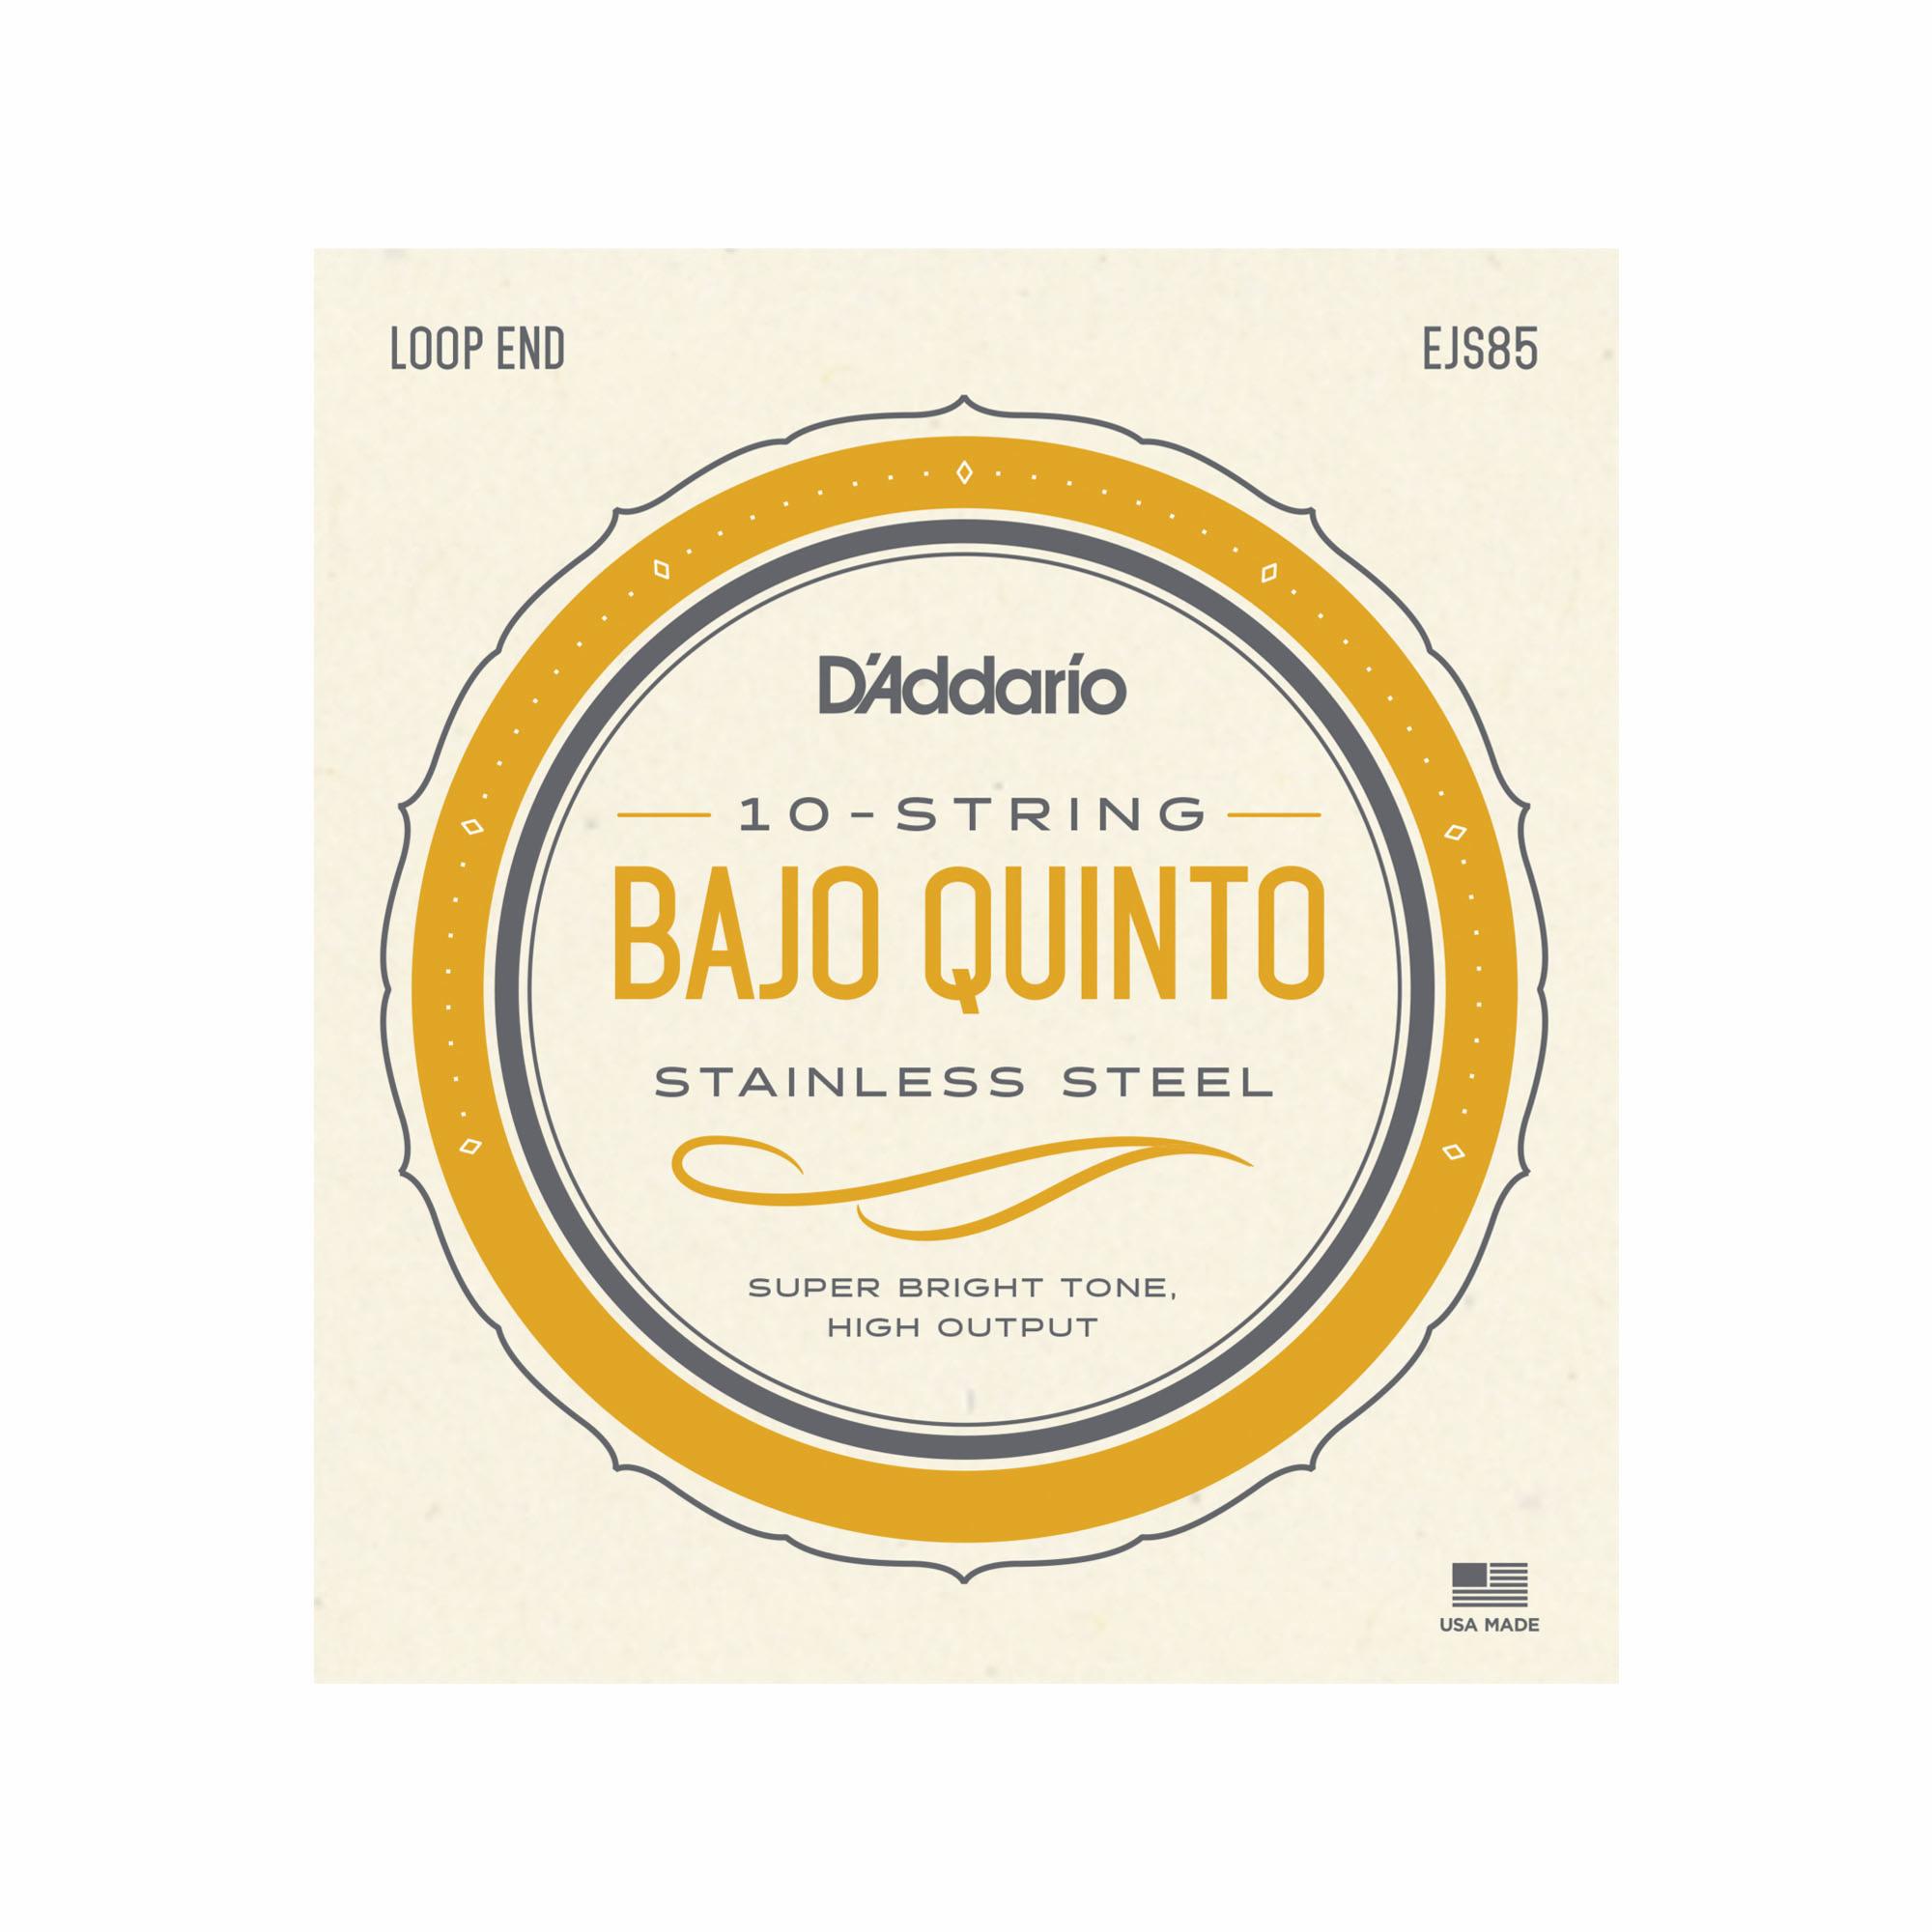 D'Addario EJ85S Bajo Quinto Stainless Steel Mariachi Strings